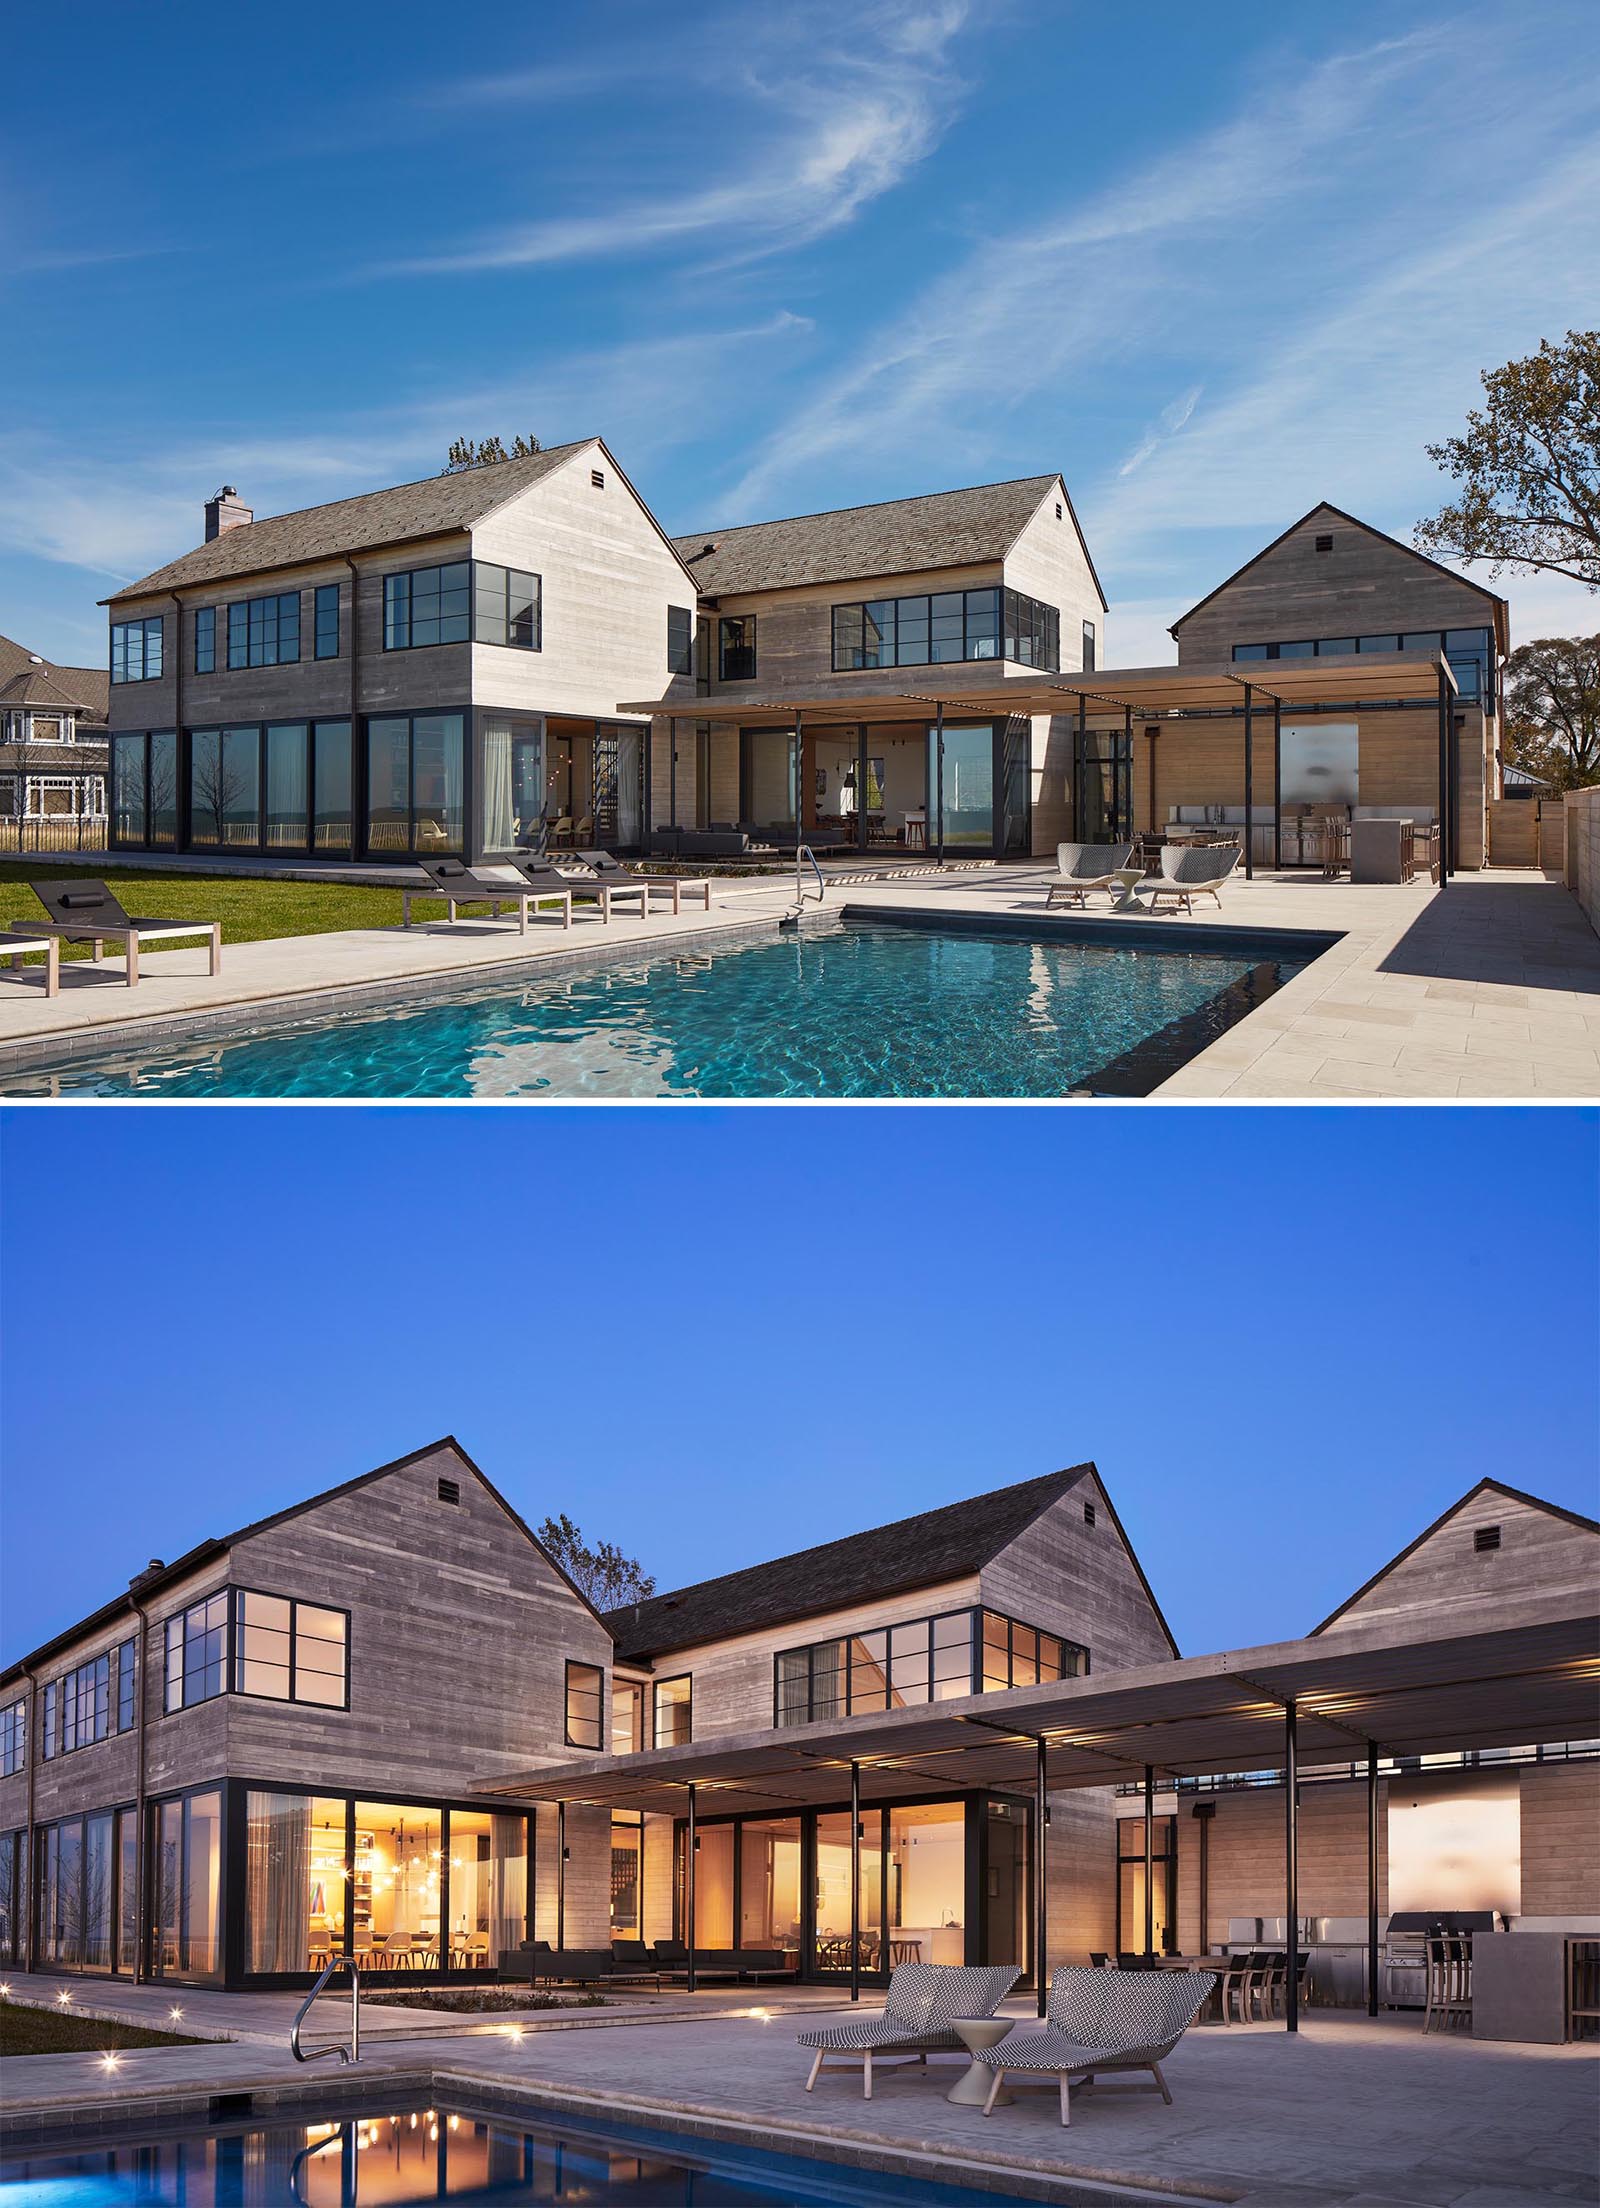 A modern house with Accoya wood siding, black window frames, wood roof shingles, and a swimming pool.